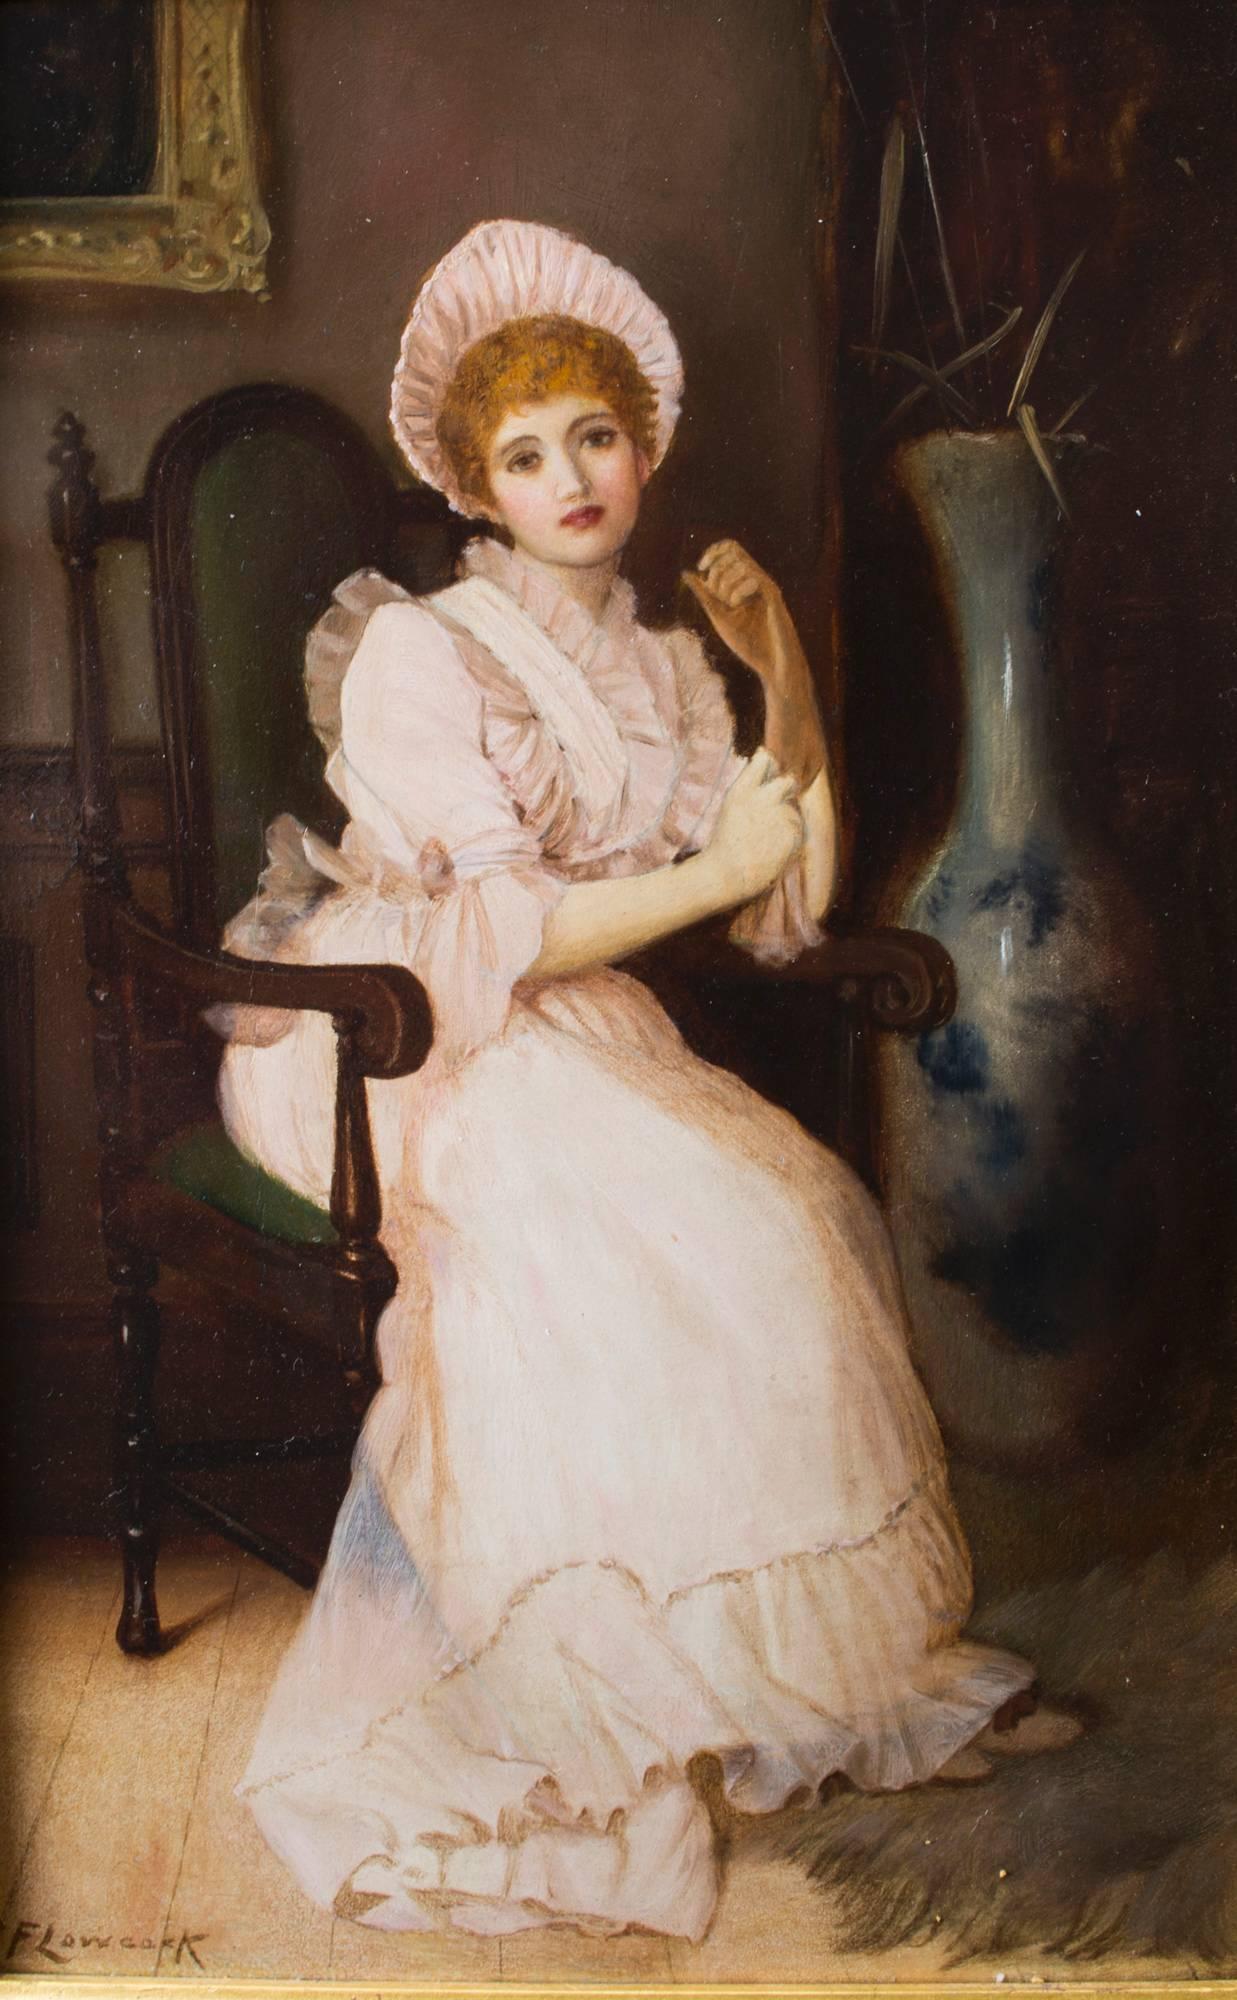 This is a superb oil on panel painting titled "The New Gown" and signed bottom left by the artist., Charles Frederick Lowcock circa 1880 in date.

Beautifully painted this sensitive and penetrating character study of a young woman shows